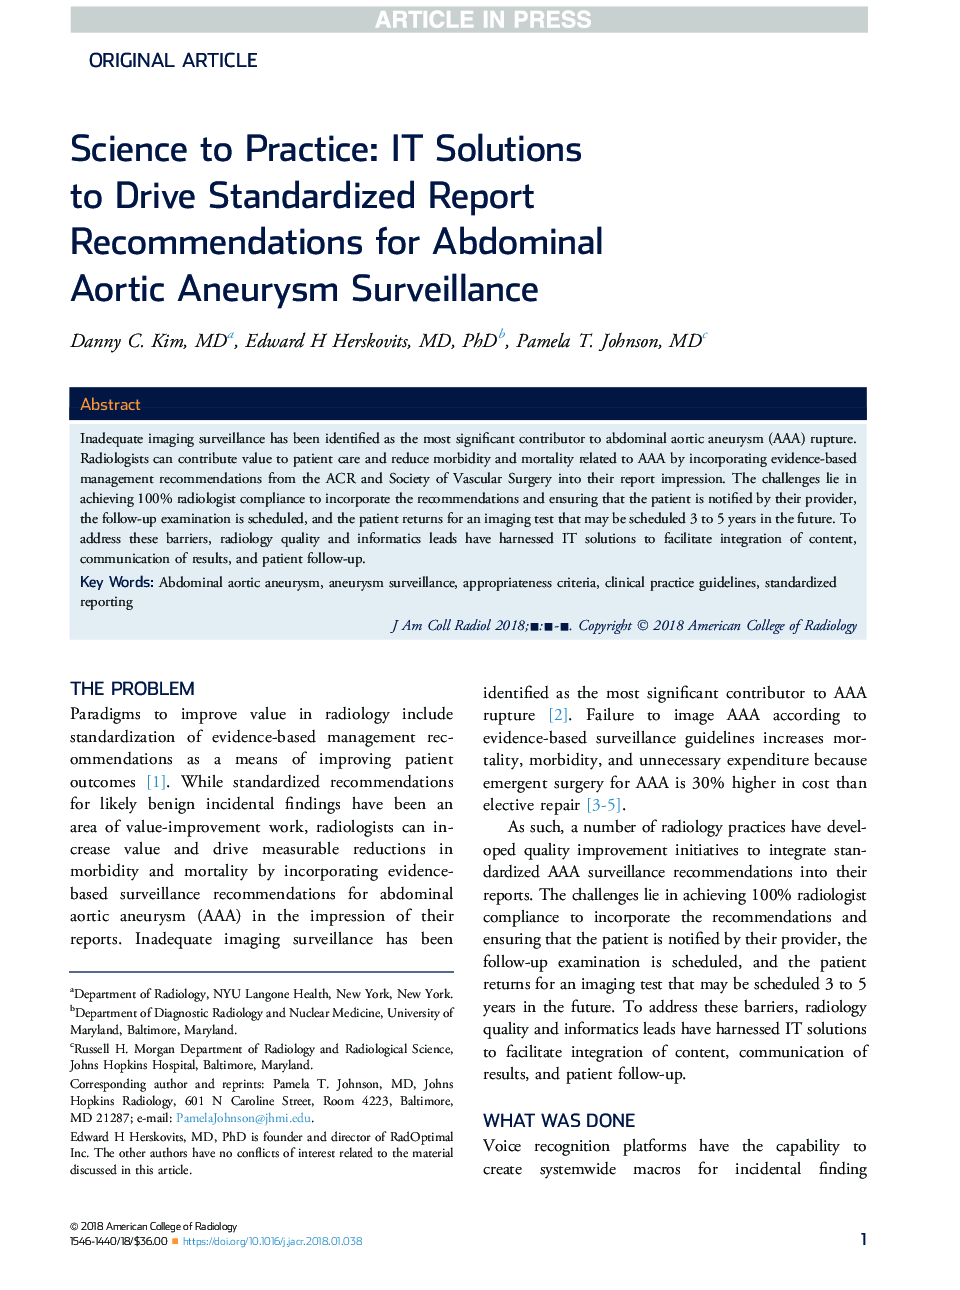 Science to Practice: IT Solutions toÂ DriveÂ Standardized Report Recommendations for Abdominal AorticÂ Aneurysm Surveillance